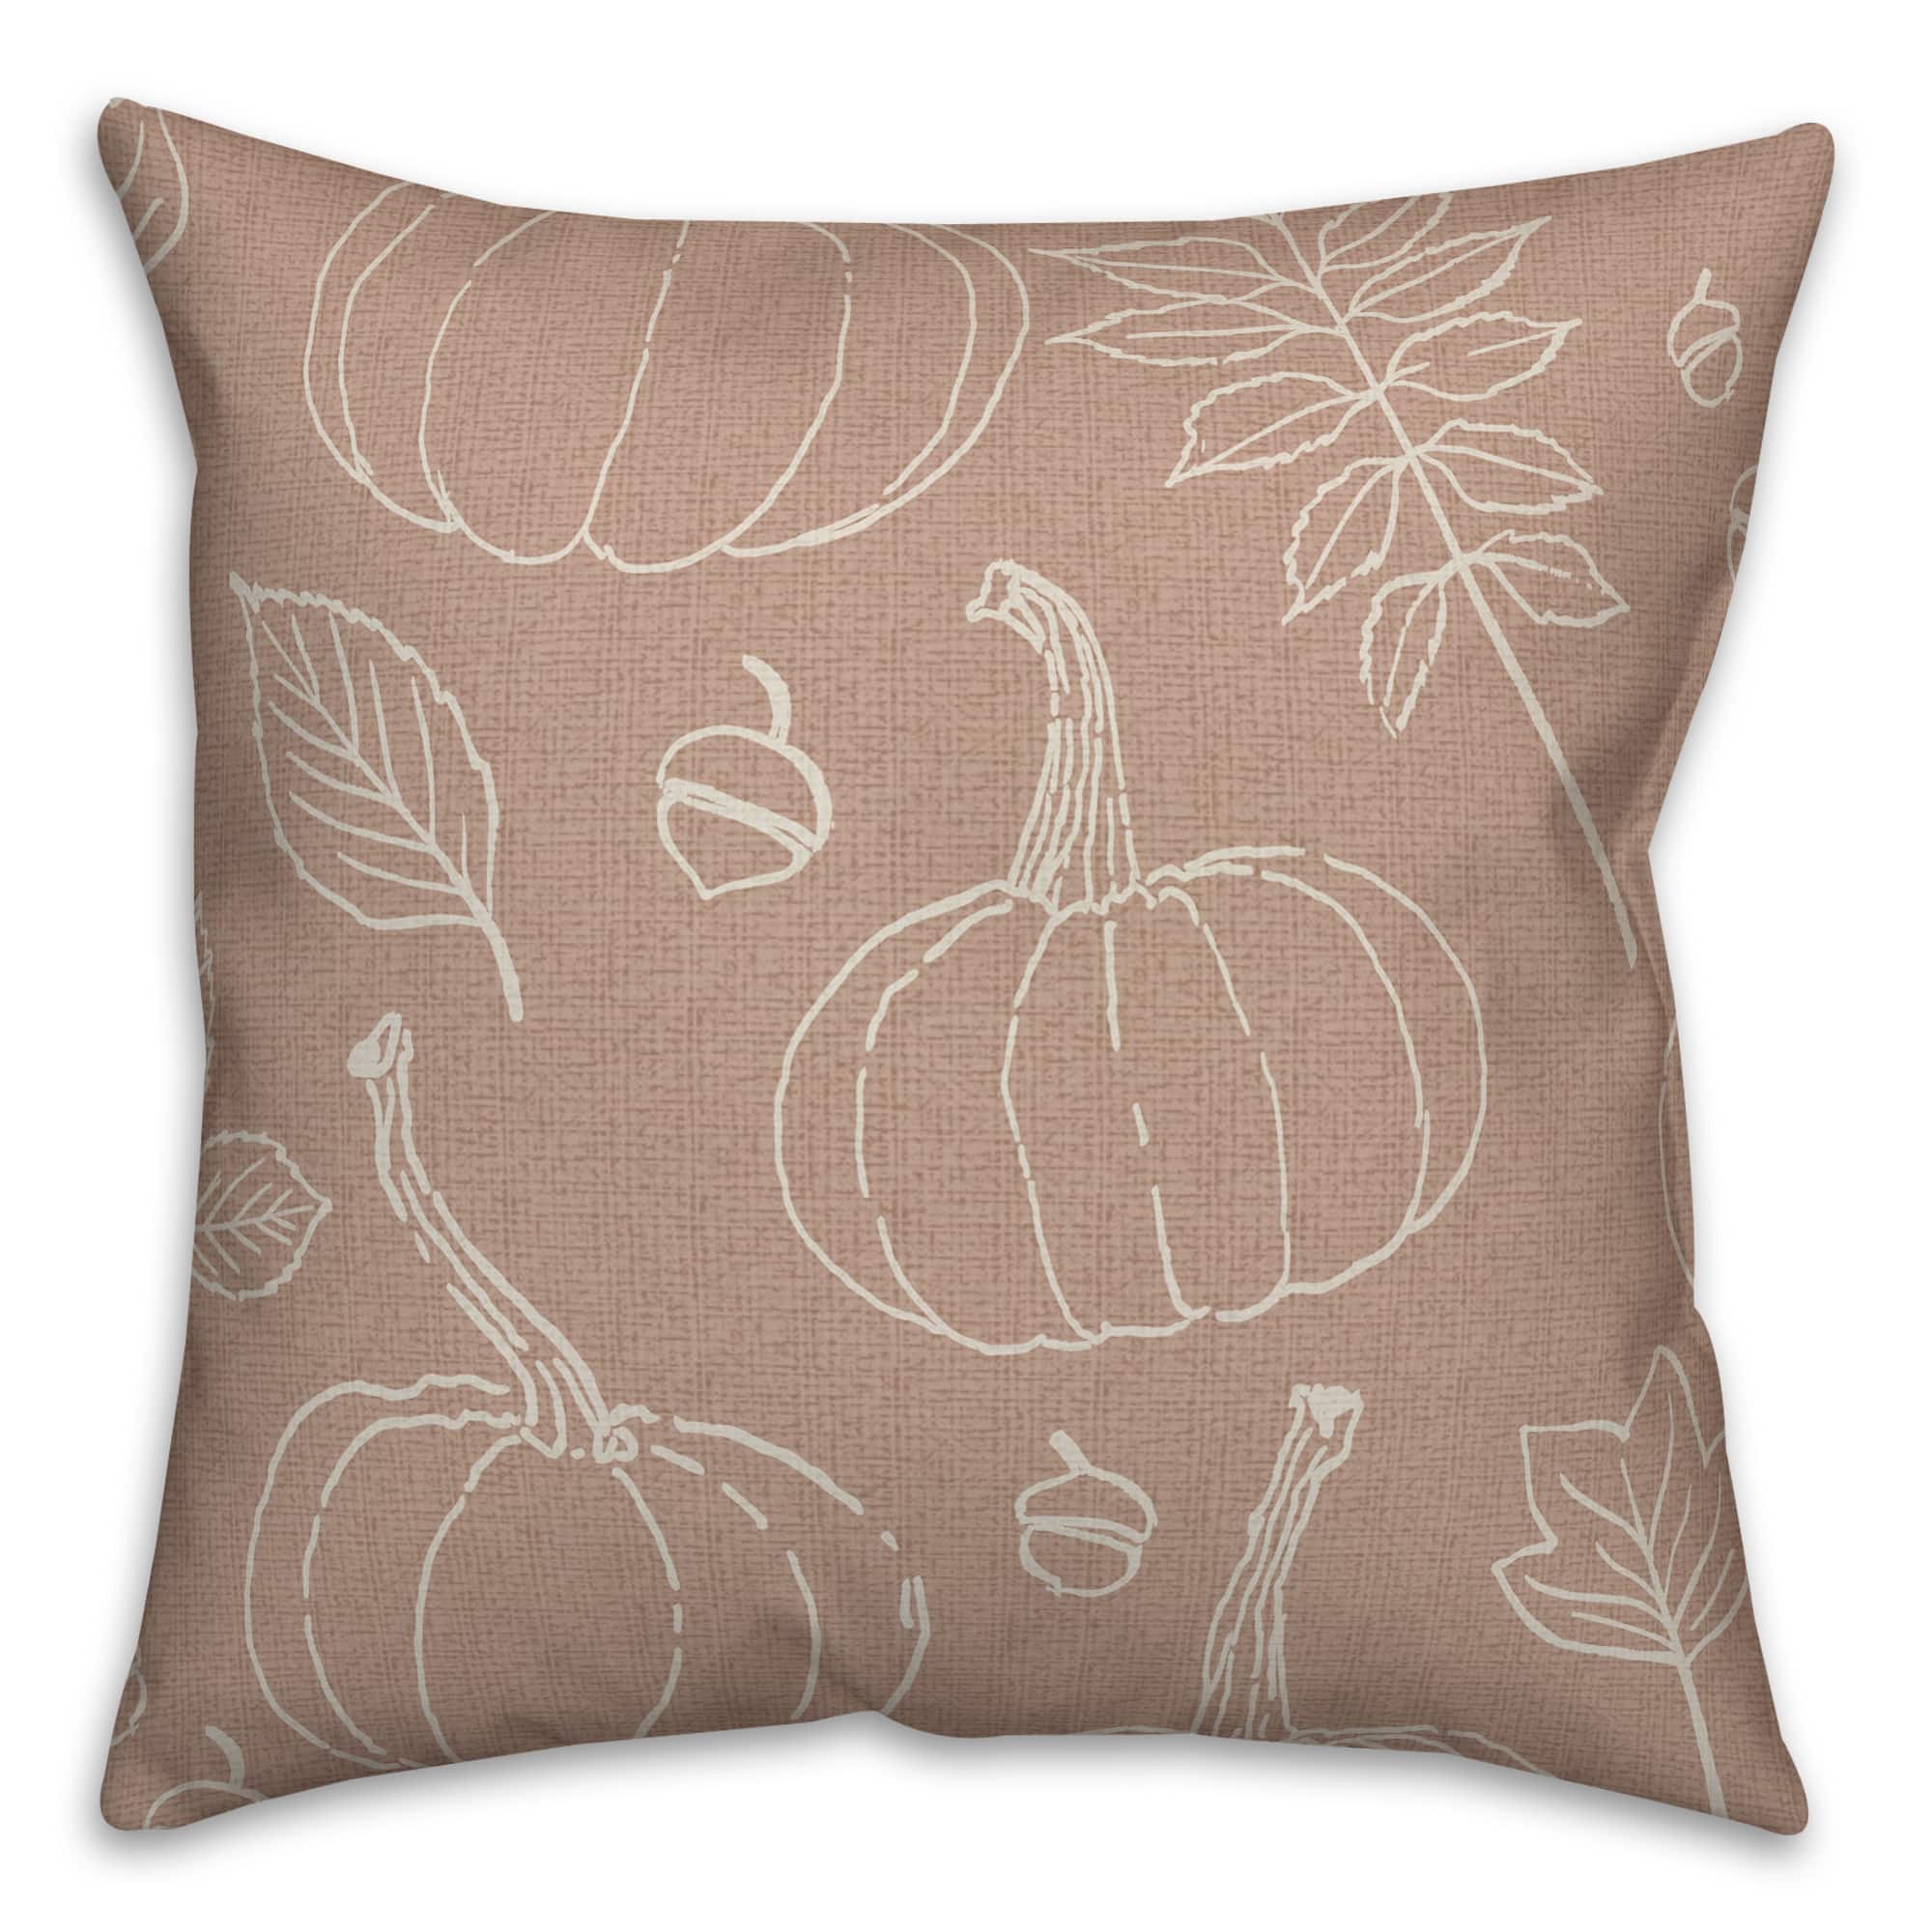 Dusty Rose Fall Pattern Throw Pillow